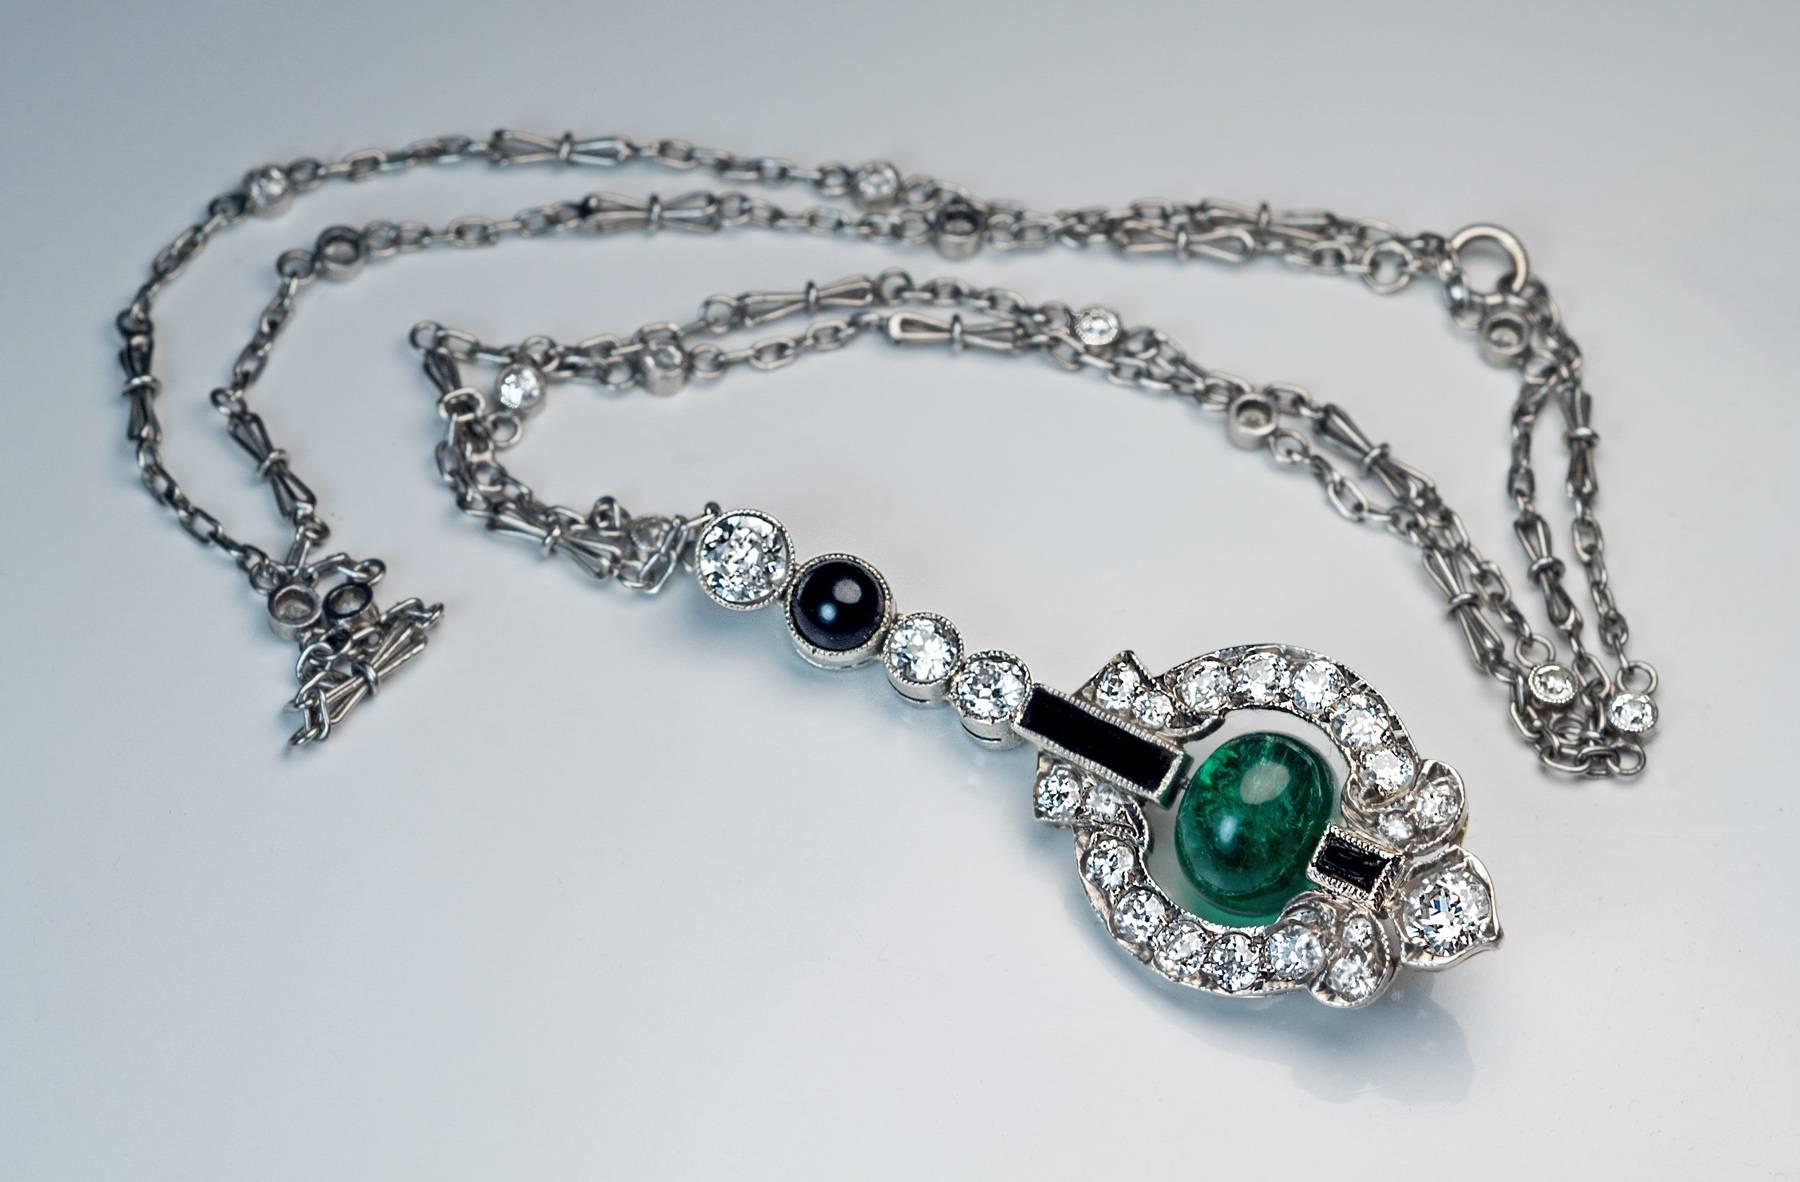 c. 1925

a silver topped gold pendant centered with an emerald bead hanging within a diamond and black onyx ornate frame, platinum chain embellished with diamonds

estimated total diamond weight 2.50 ct

length of the pendant (with bail) 42 mm